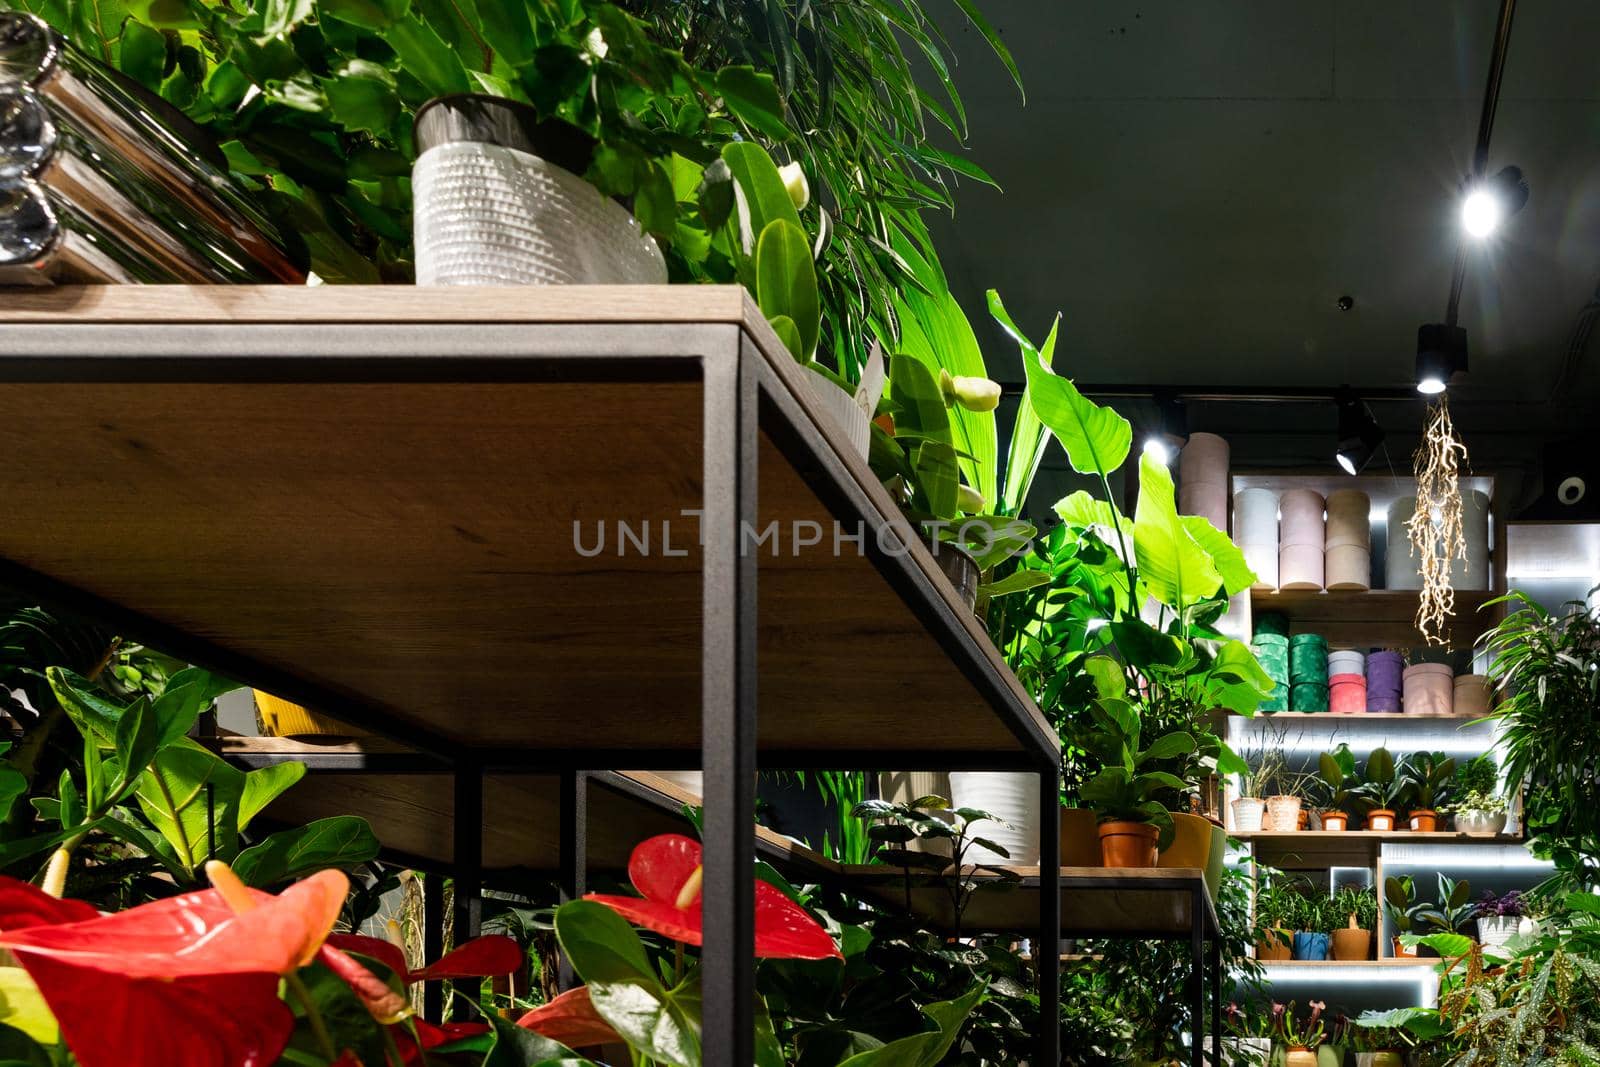 stylish interior of a florist shop with potted exotic plants on the shelves.